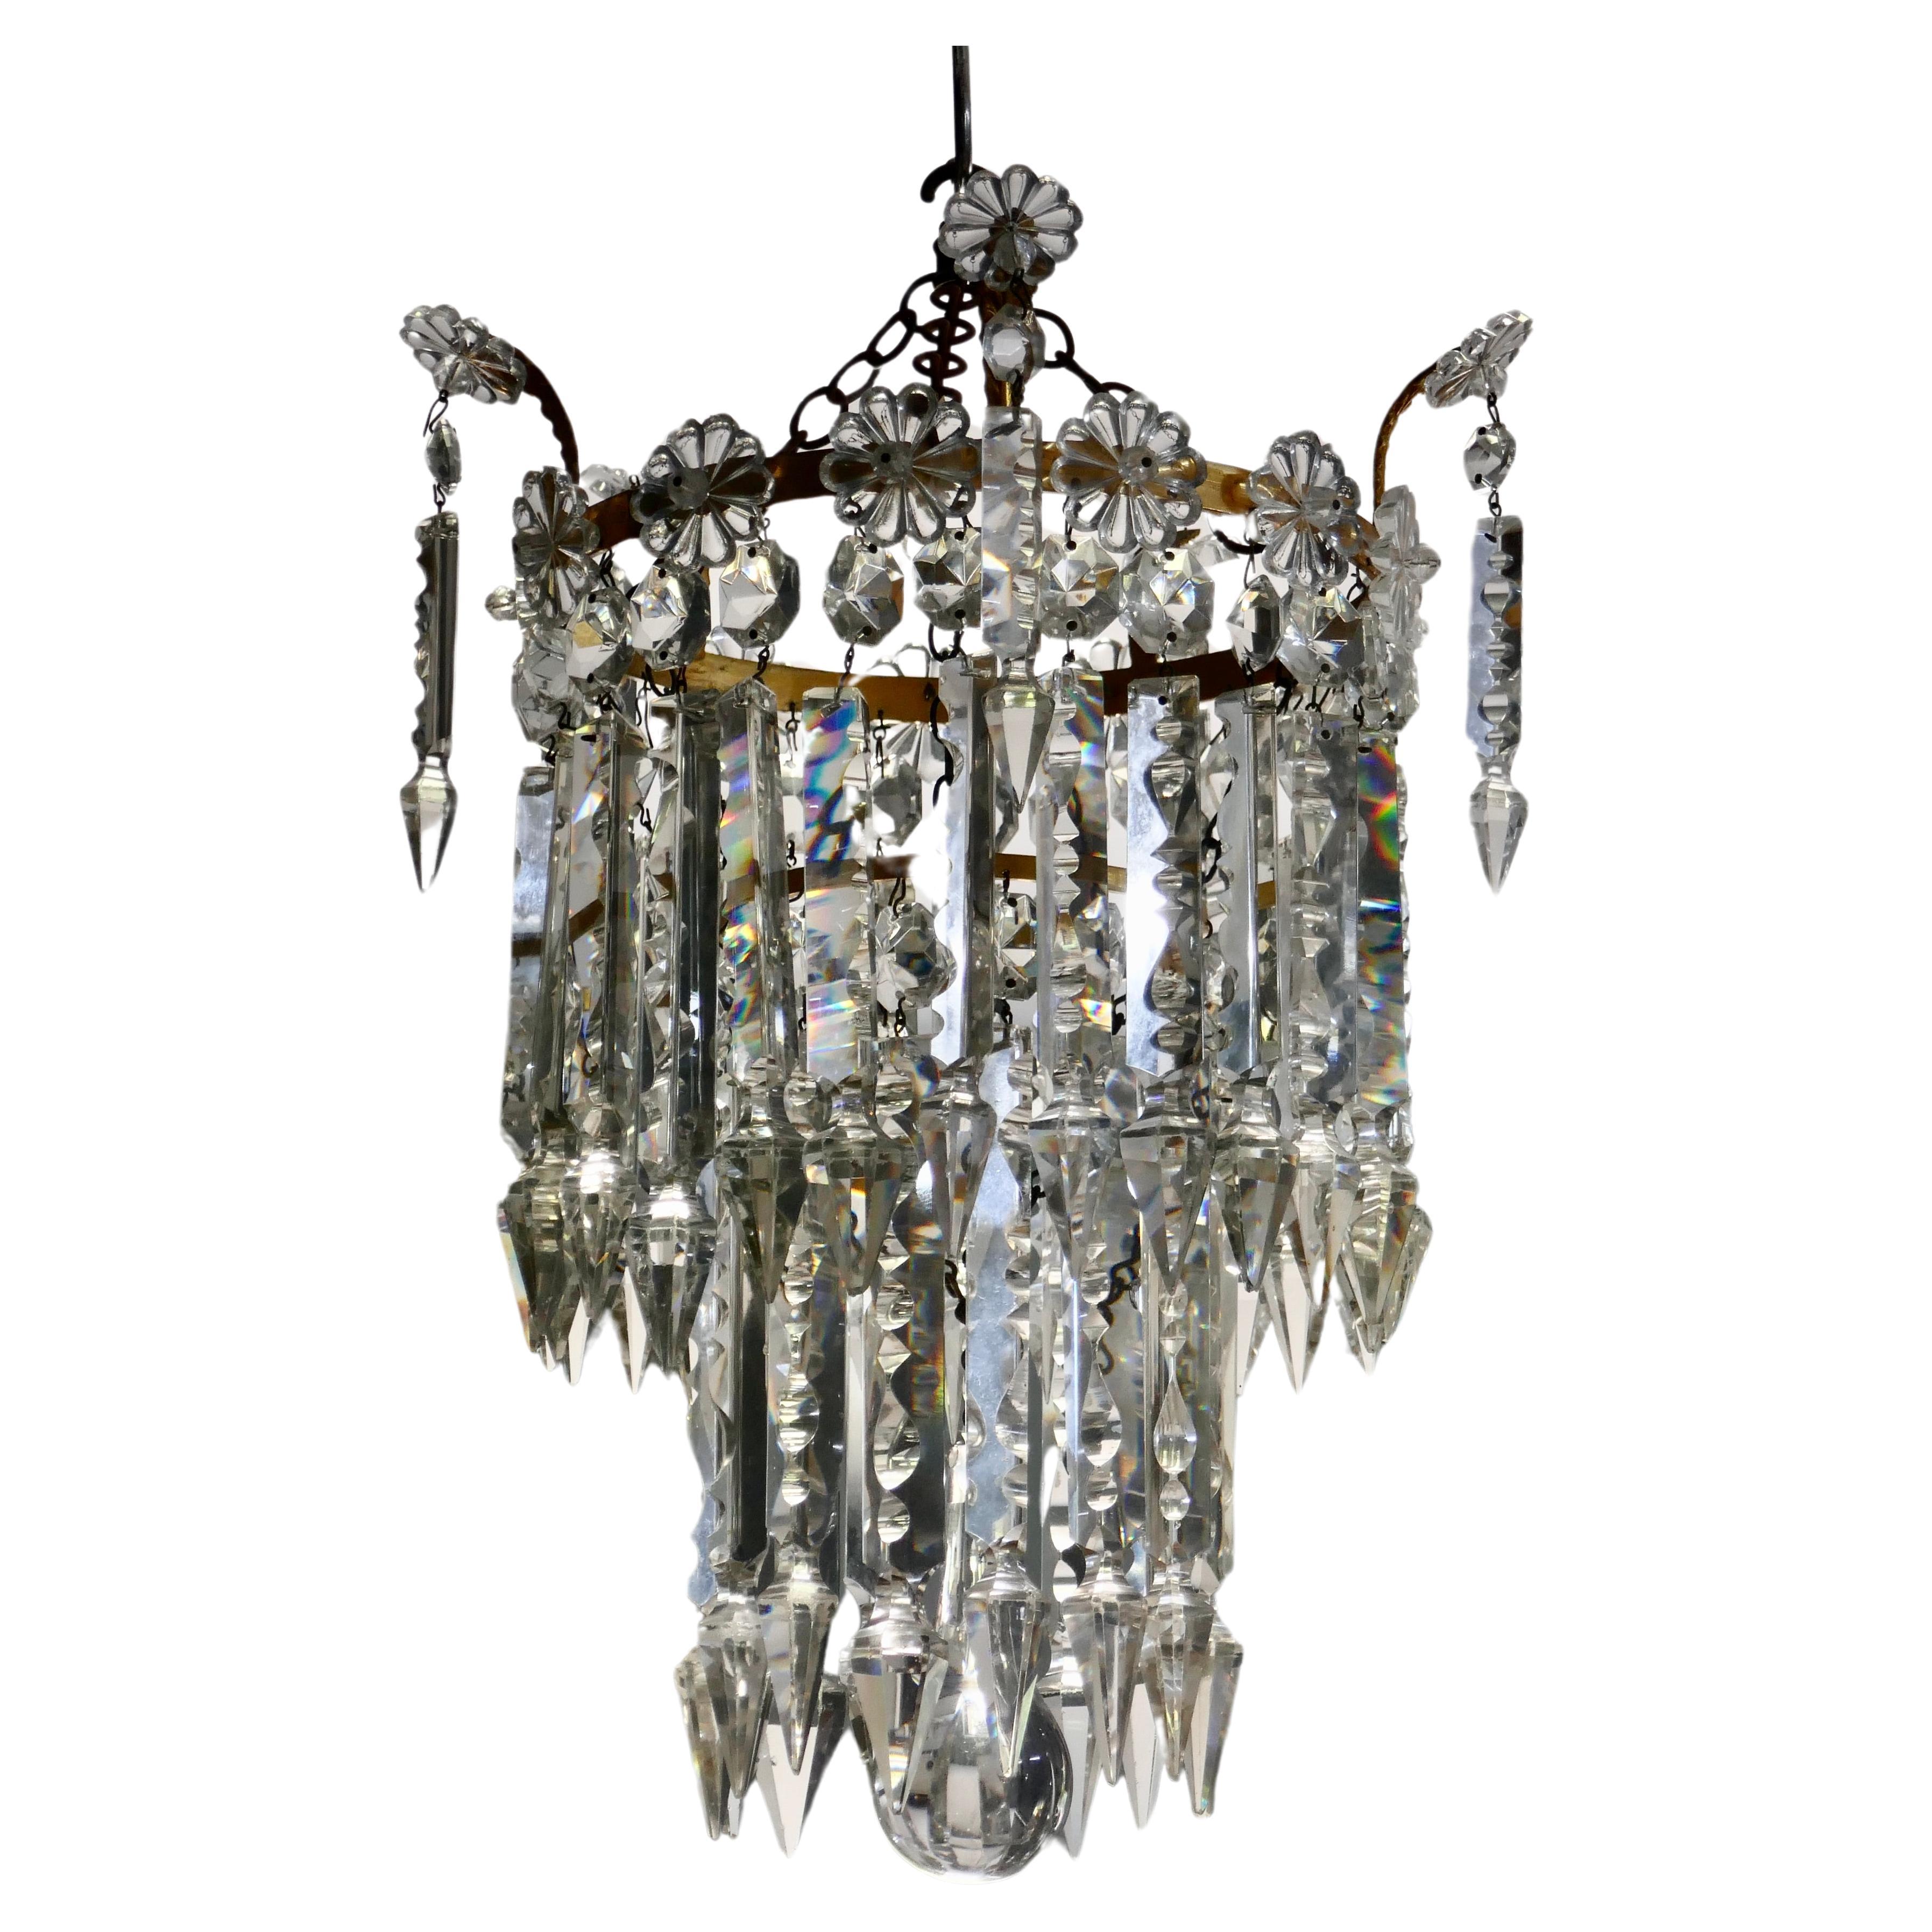 A Stunning Waterfall 2 Tier Crystal Chandelier   